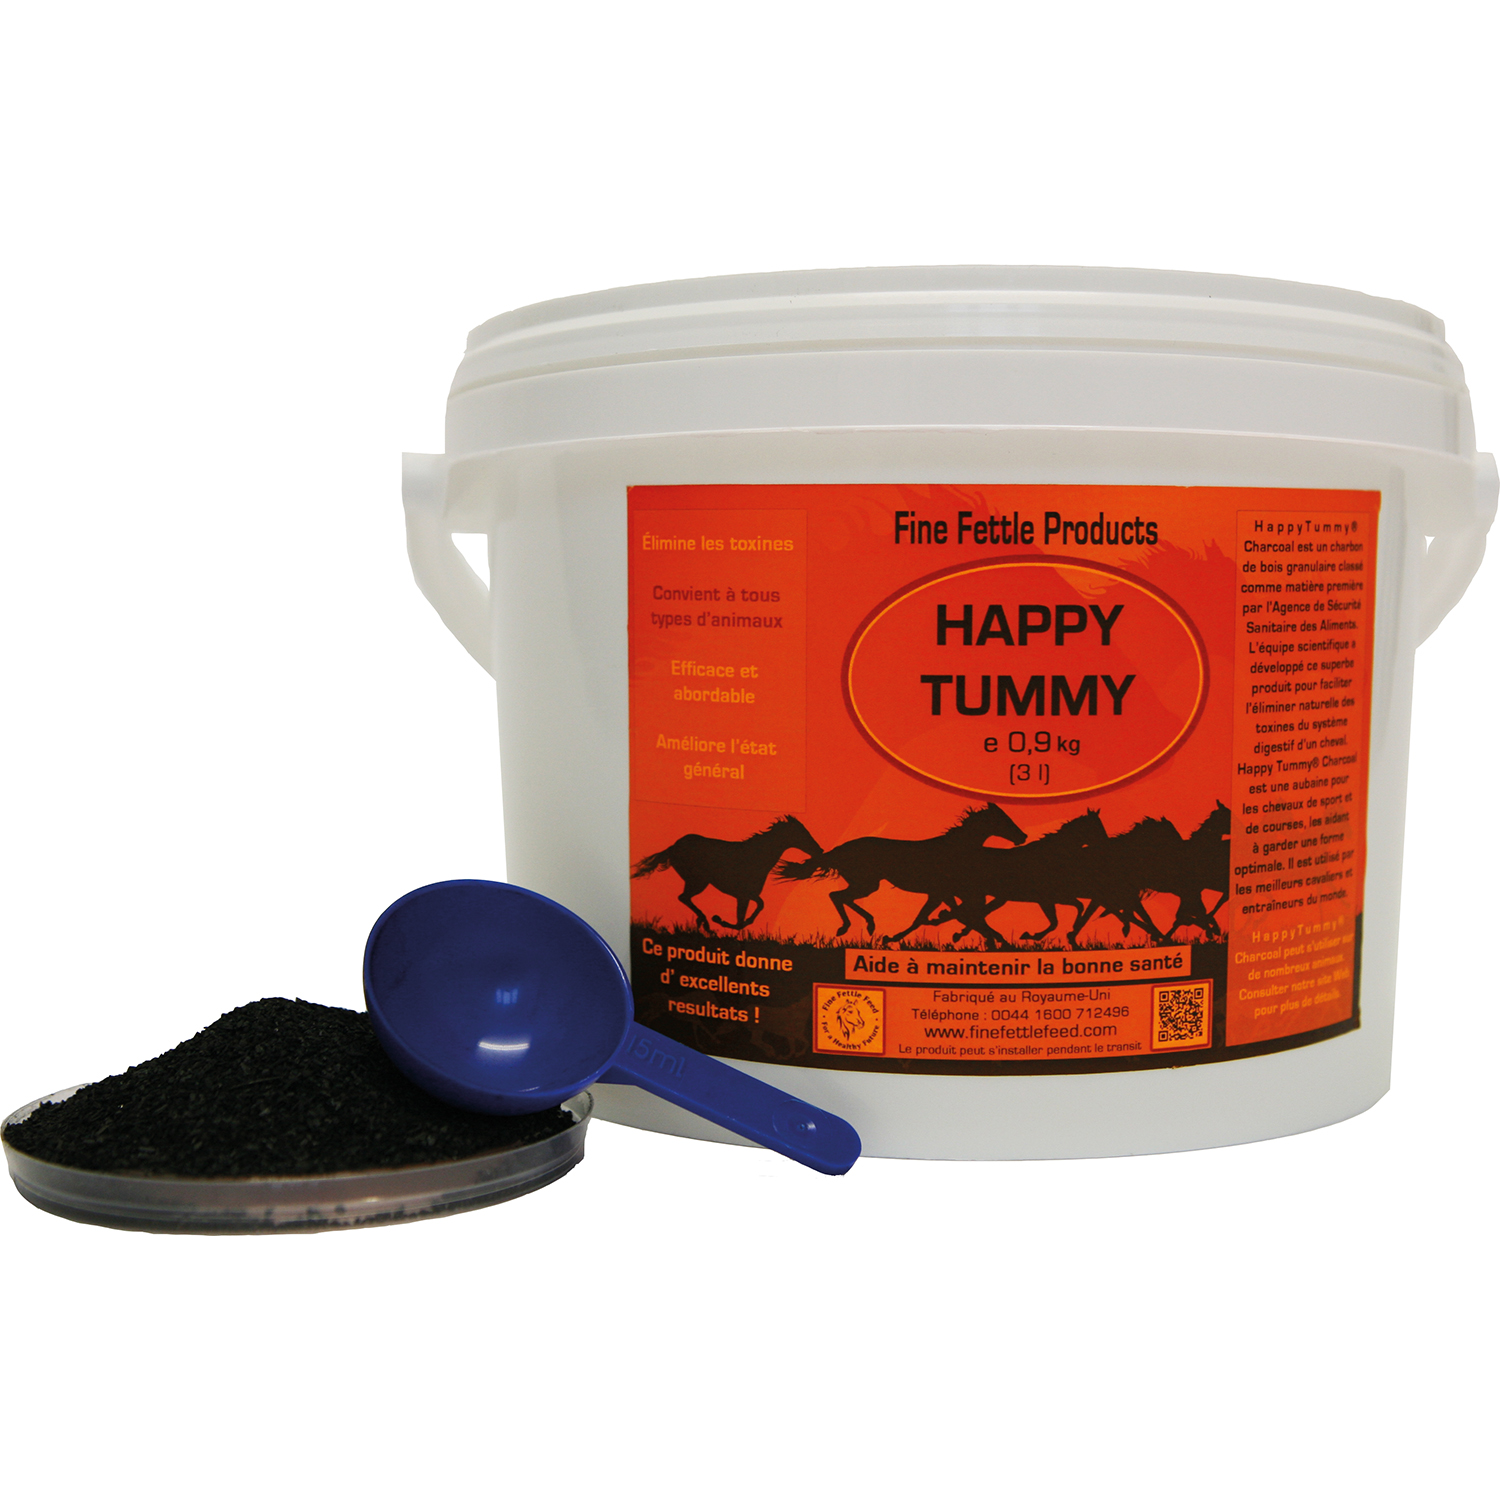 FINE FETTLE PRODUCTS HAPPY TUMMY 0.9 KG 0.9 KG